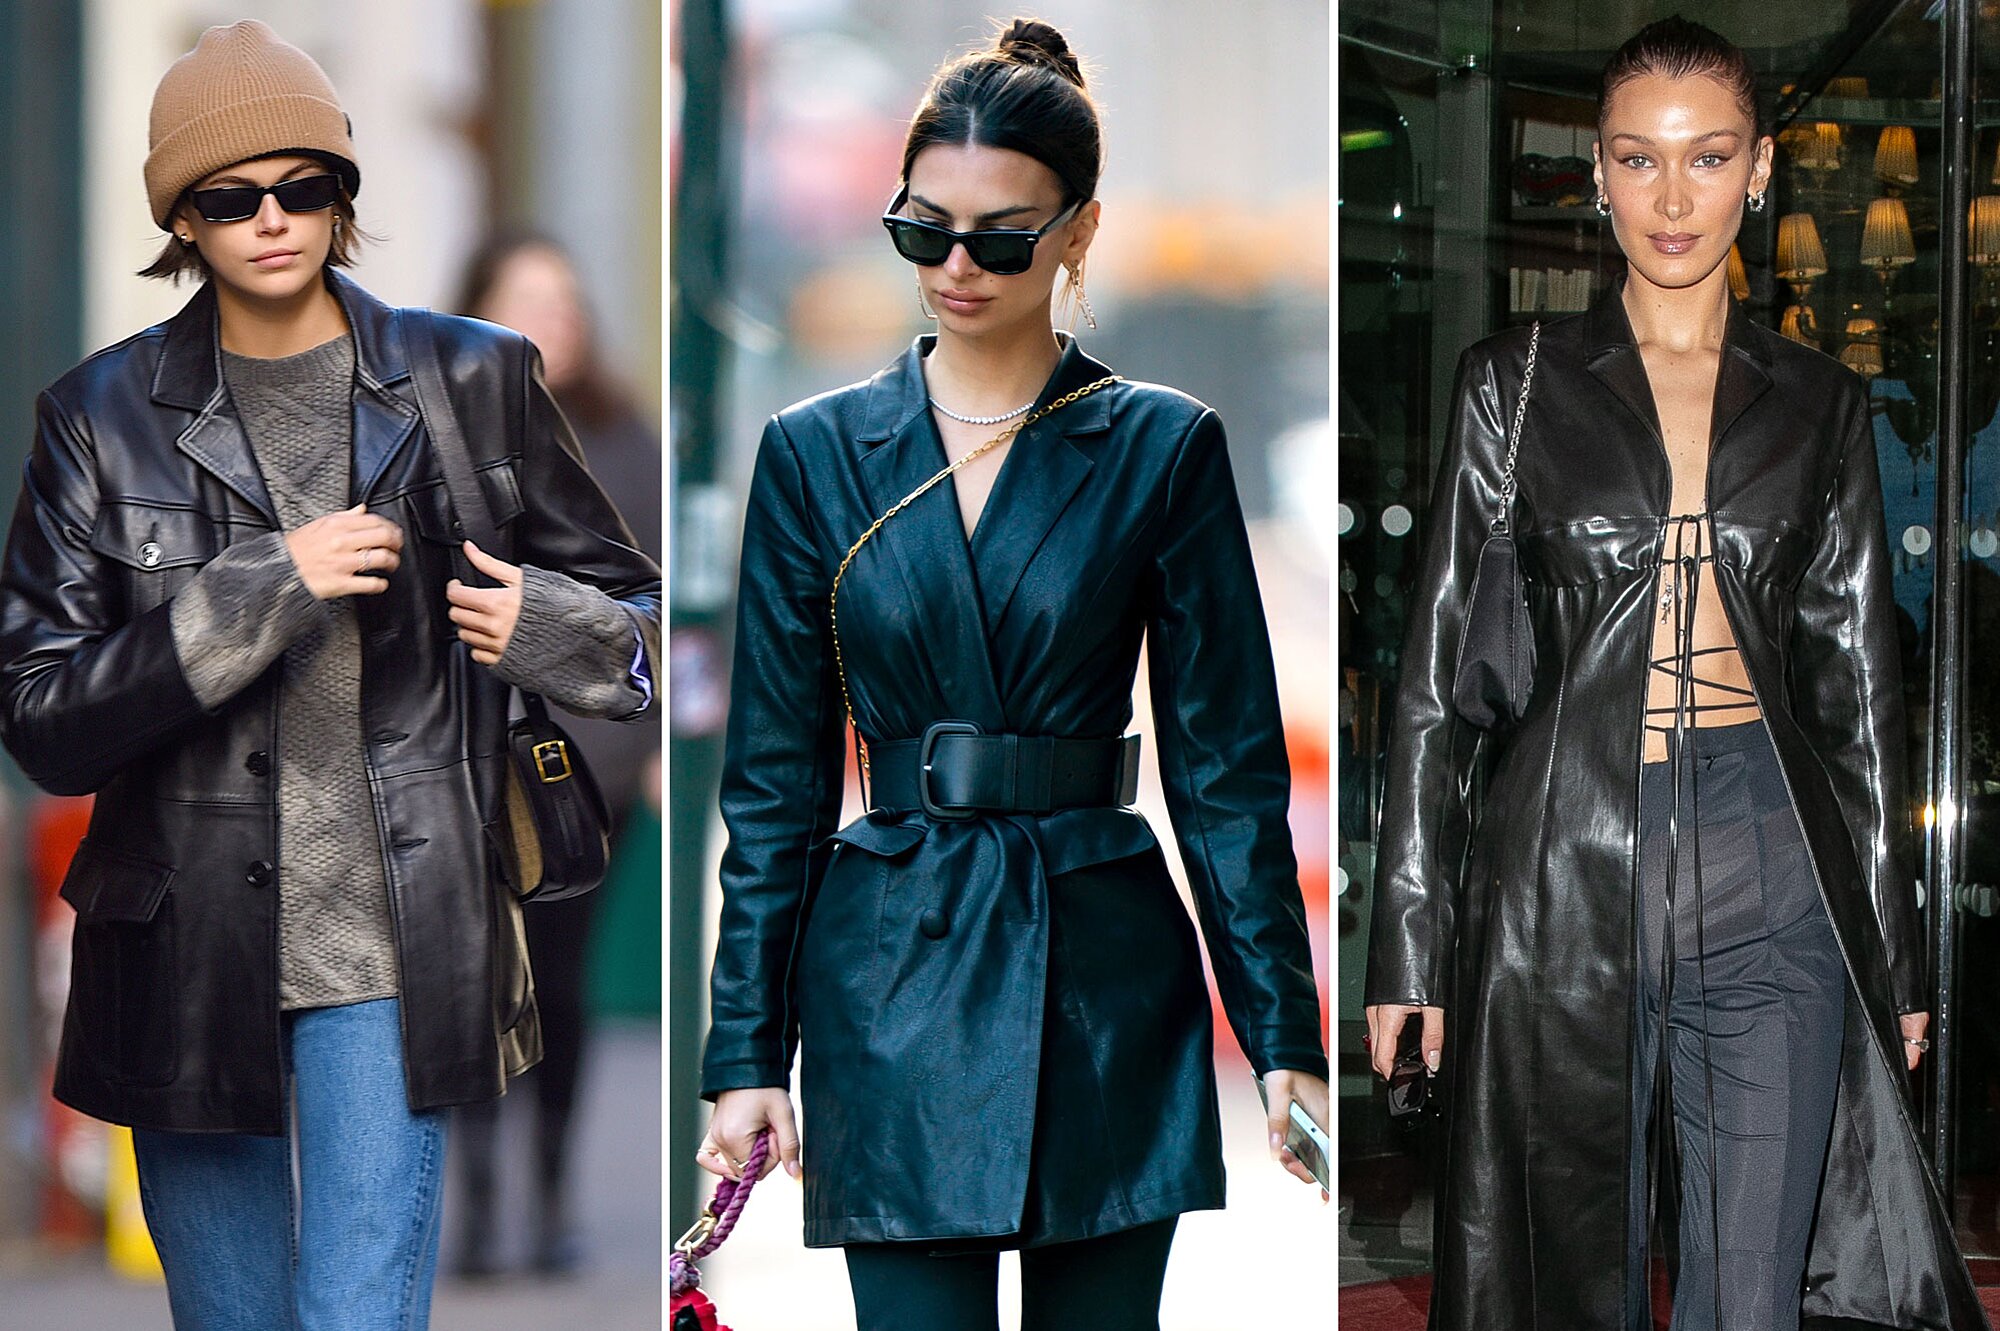 Leather Coats | Trends Leather Clothing's Are Back - Crave4leather